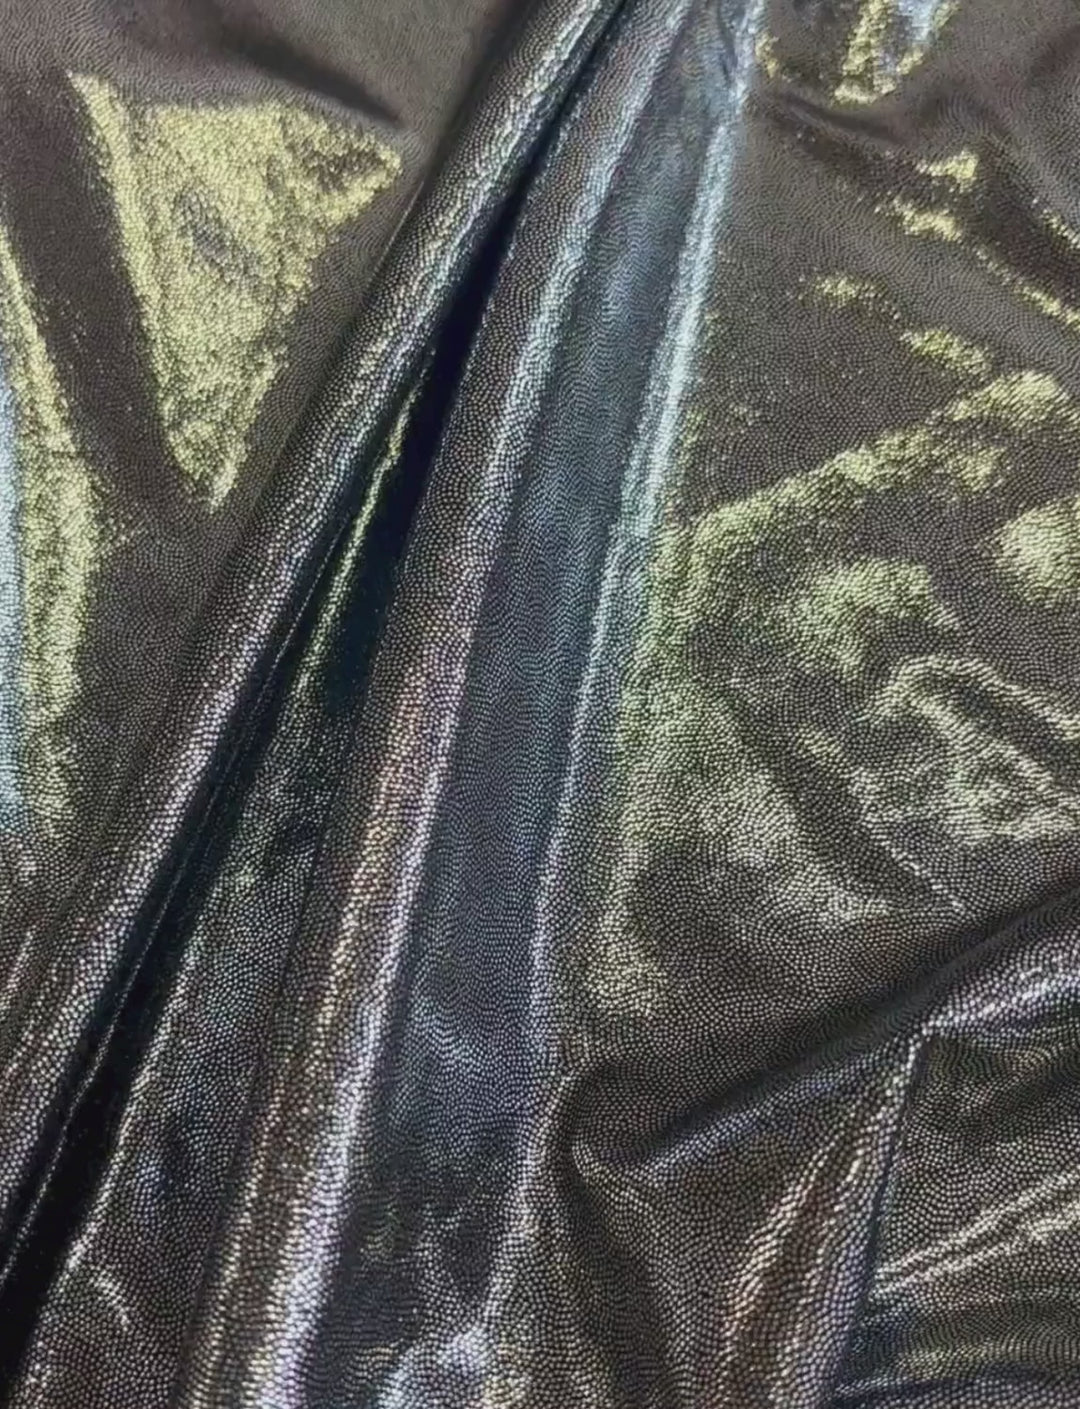 Silver foiled fabric with a black spandex base.